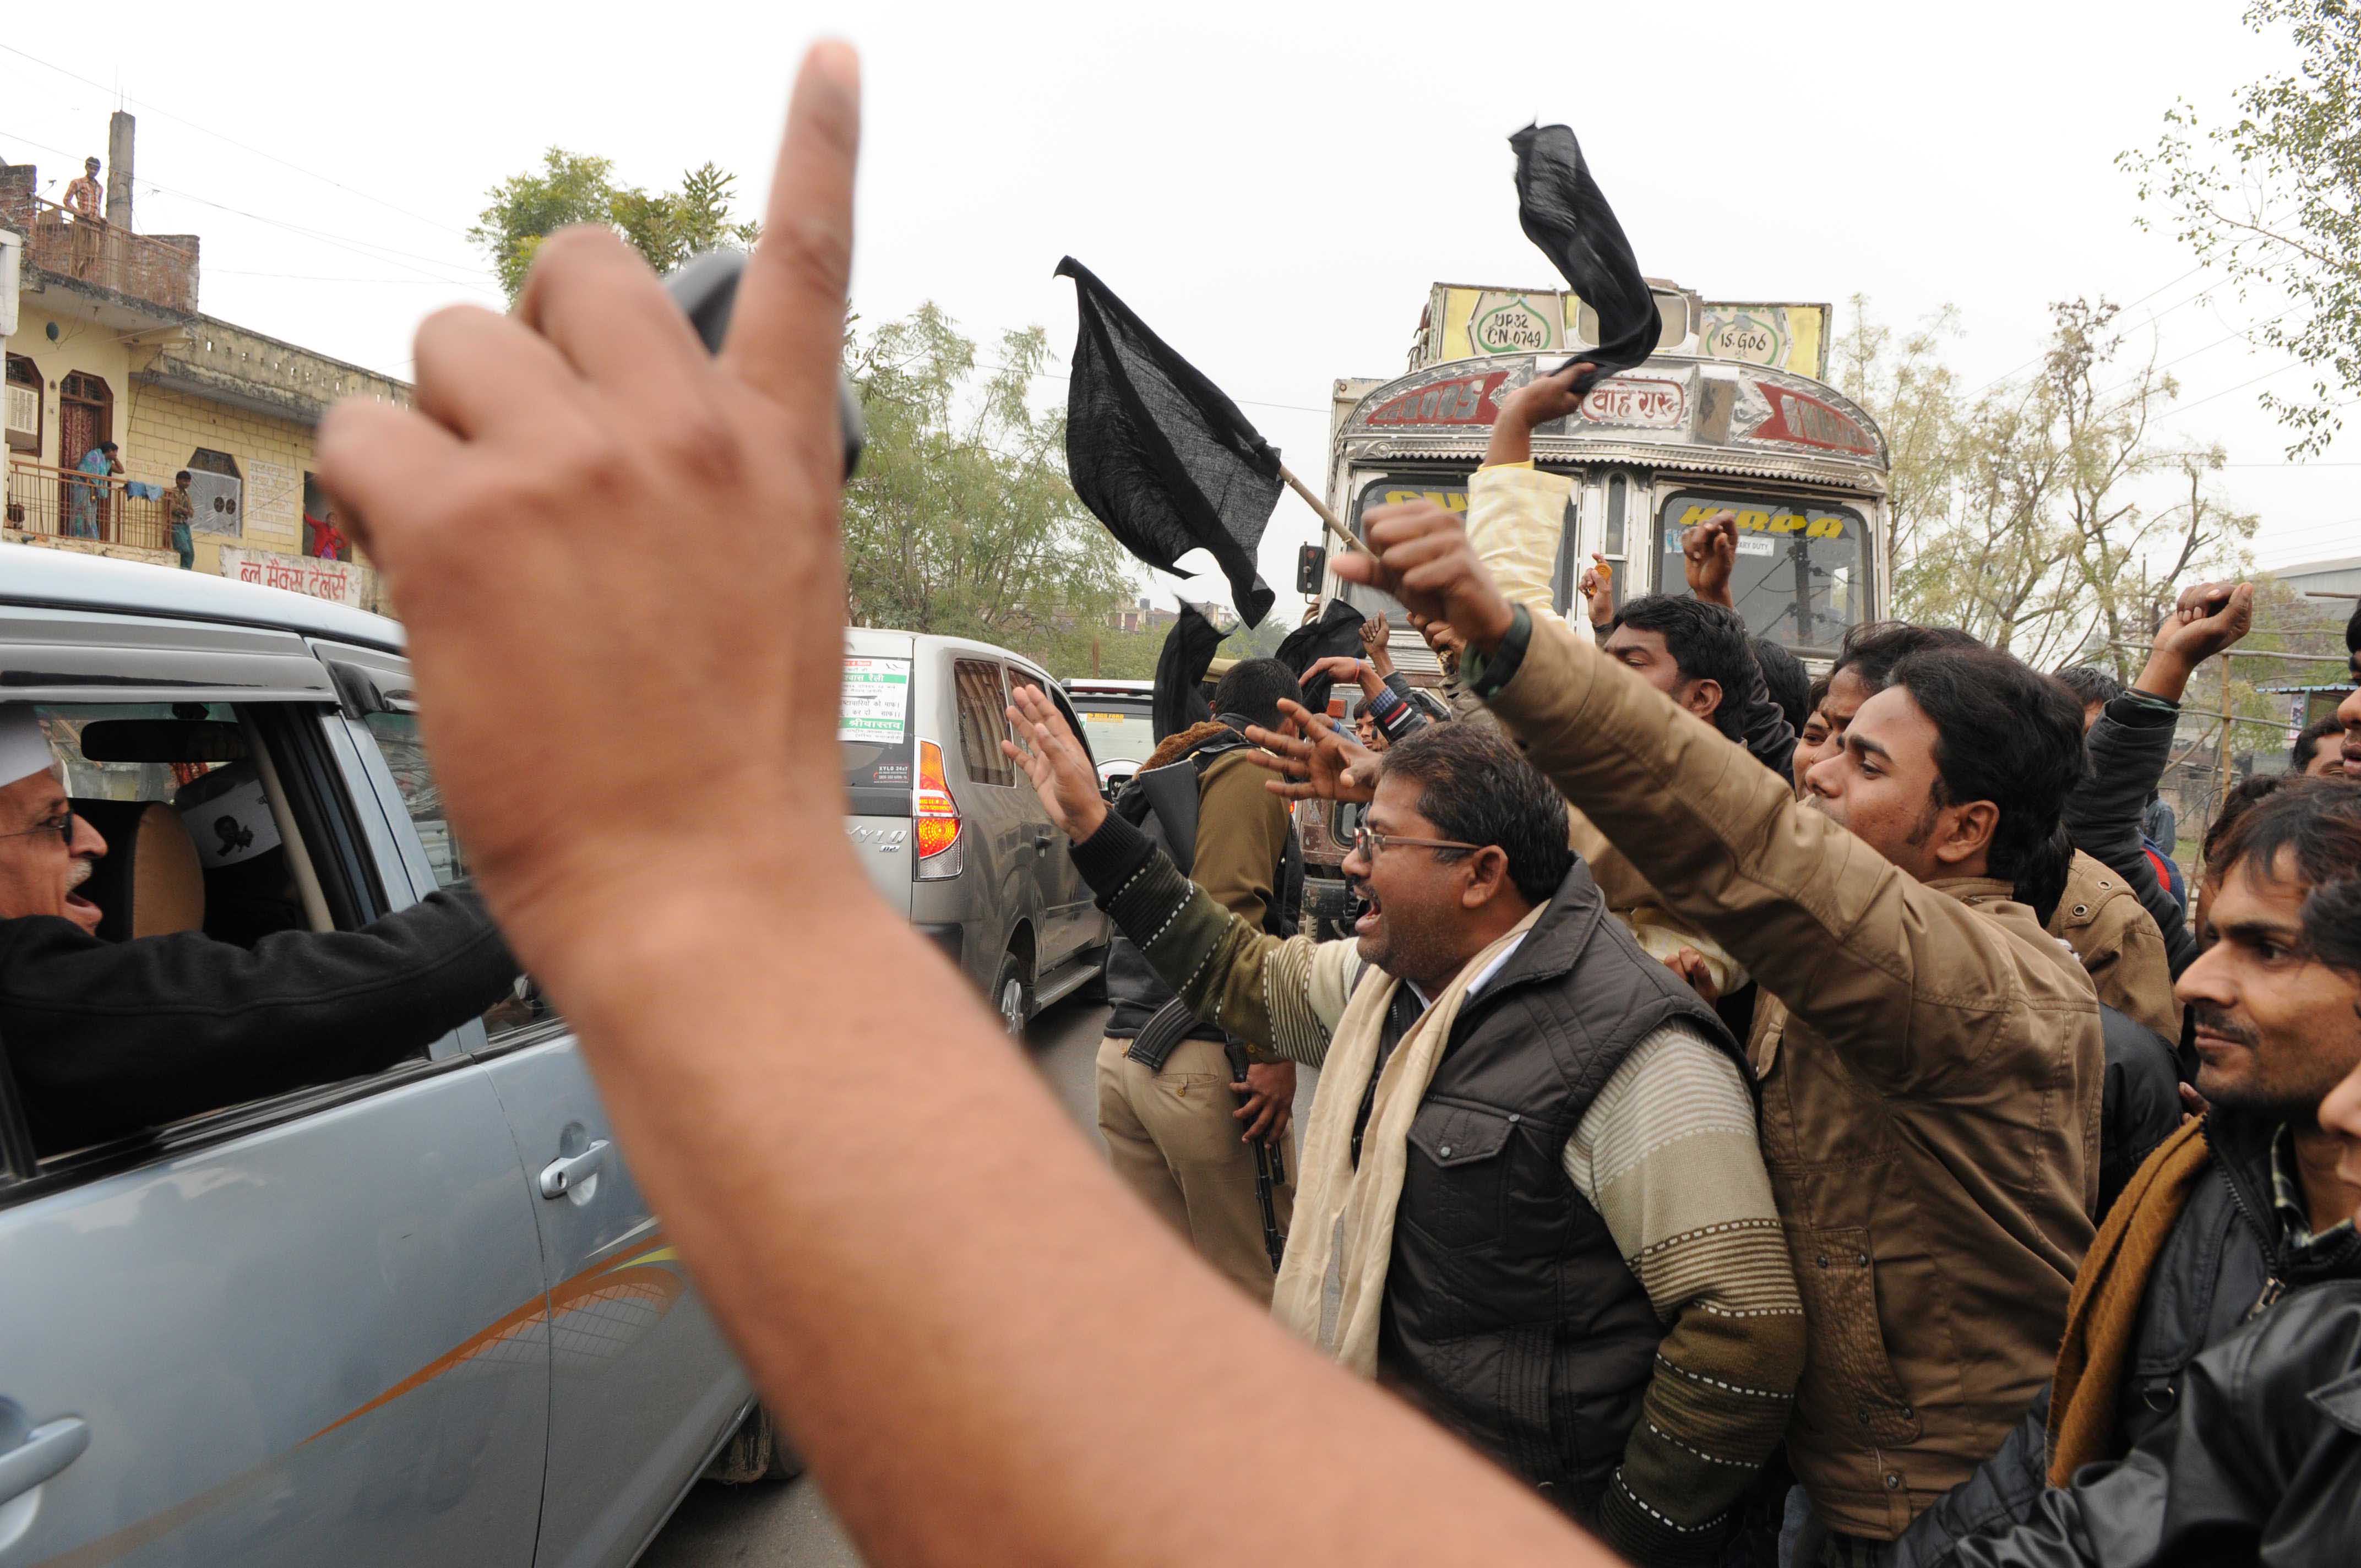 A group of Congress supporters greet AAP leader Kumar Vishwas with black flags on his way to Amethi to address in January 2014. (Hindustan Times&mdash;Hindustan Times via Getty Images)